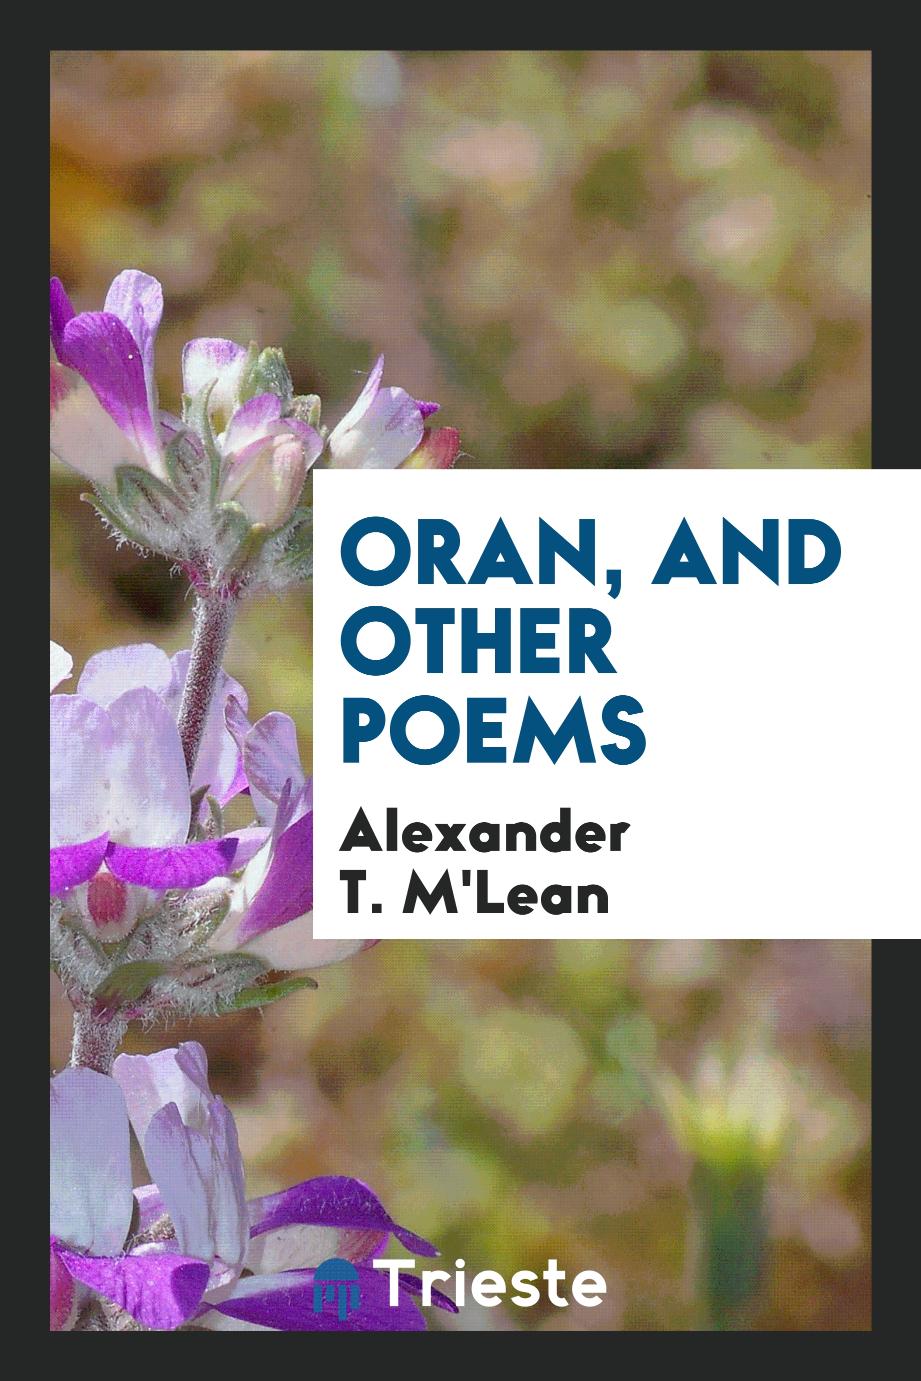 Oran, and Other Poems